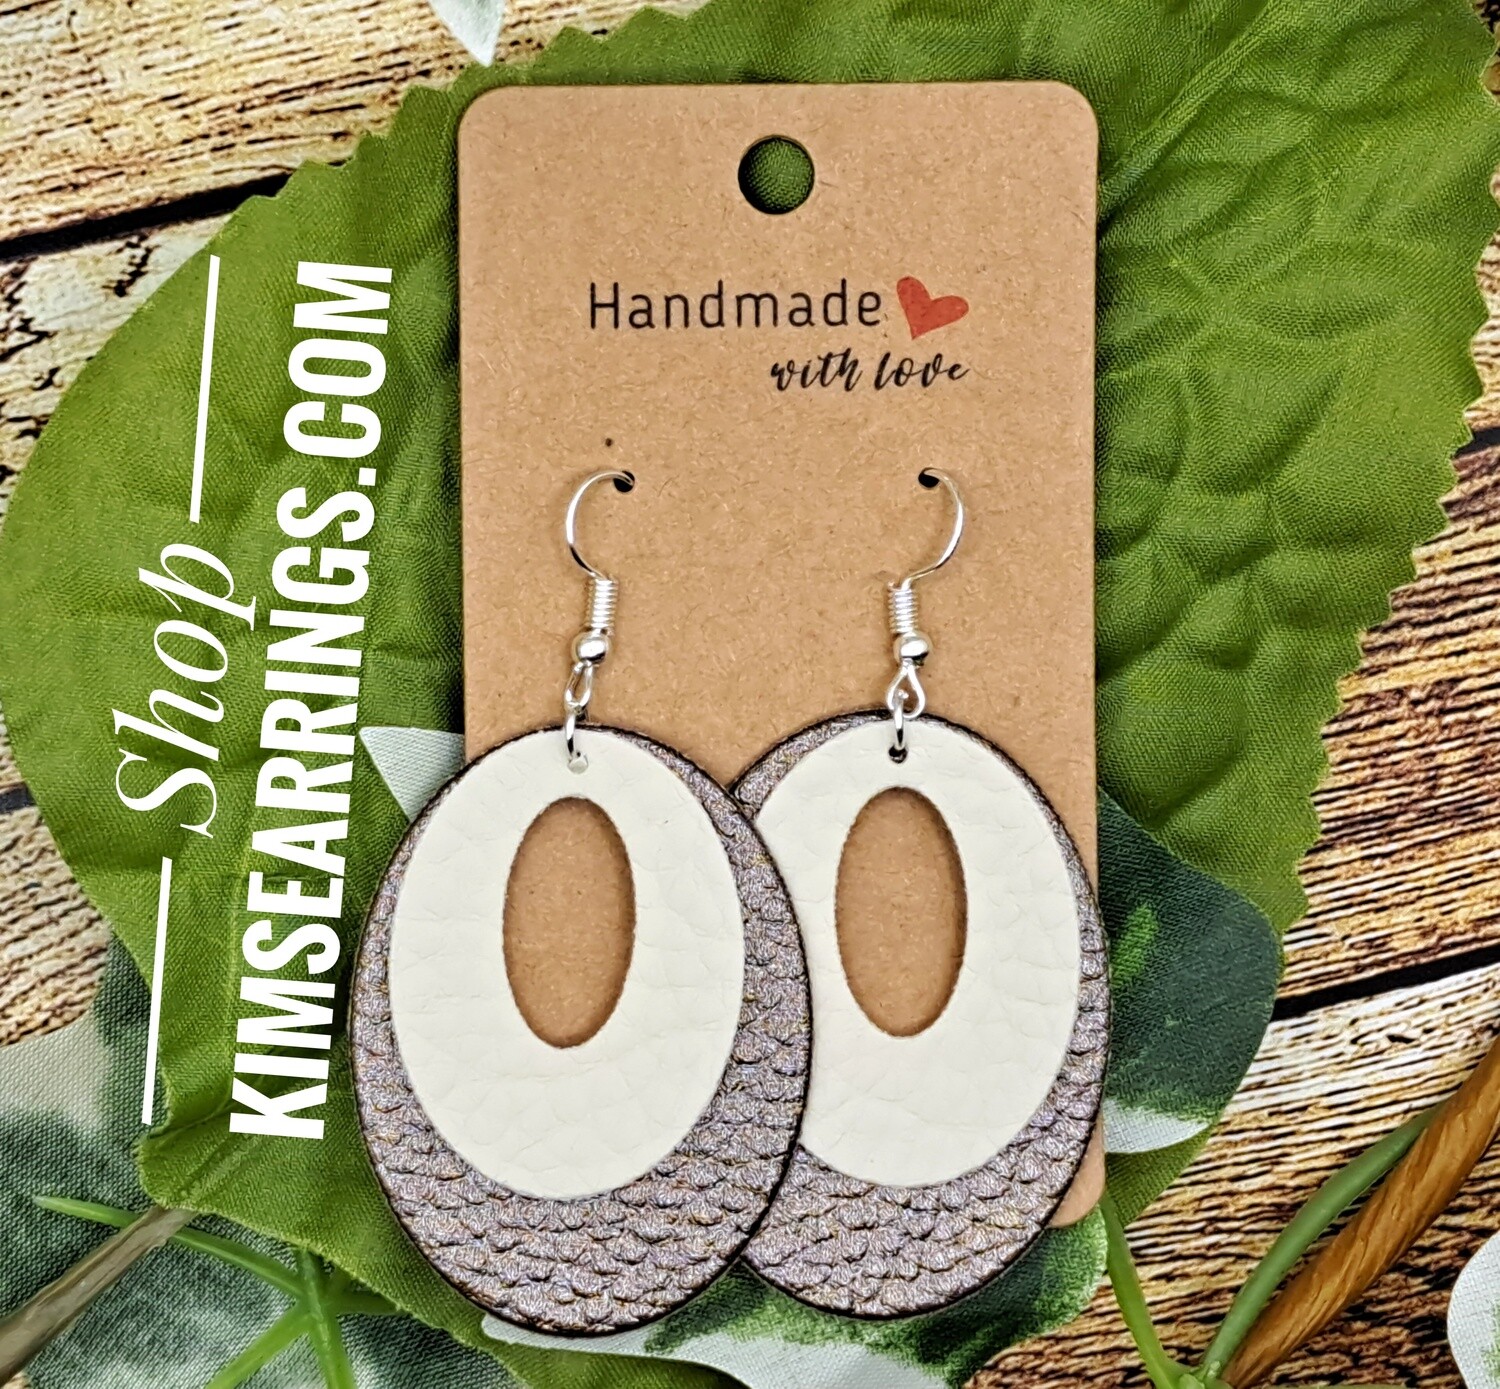 Handmade White/Brown Layered Hoops Faux Leather Earrings